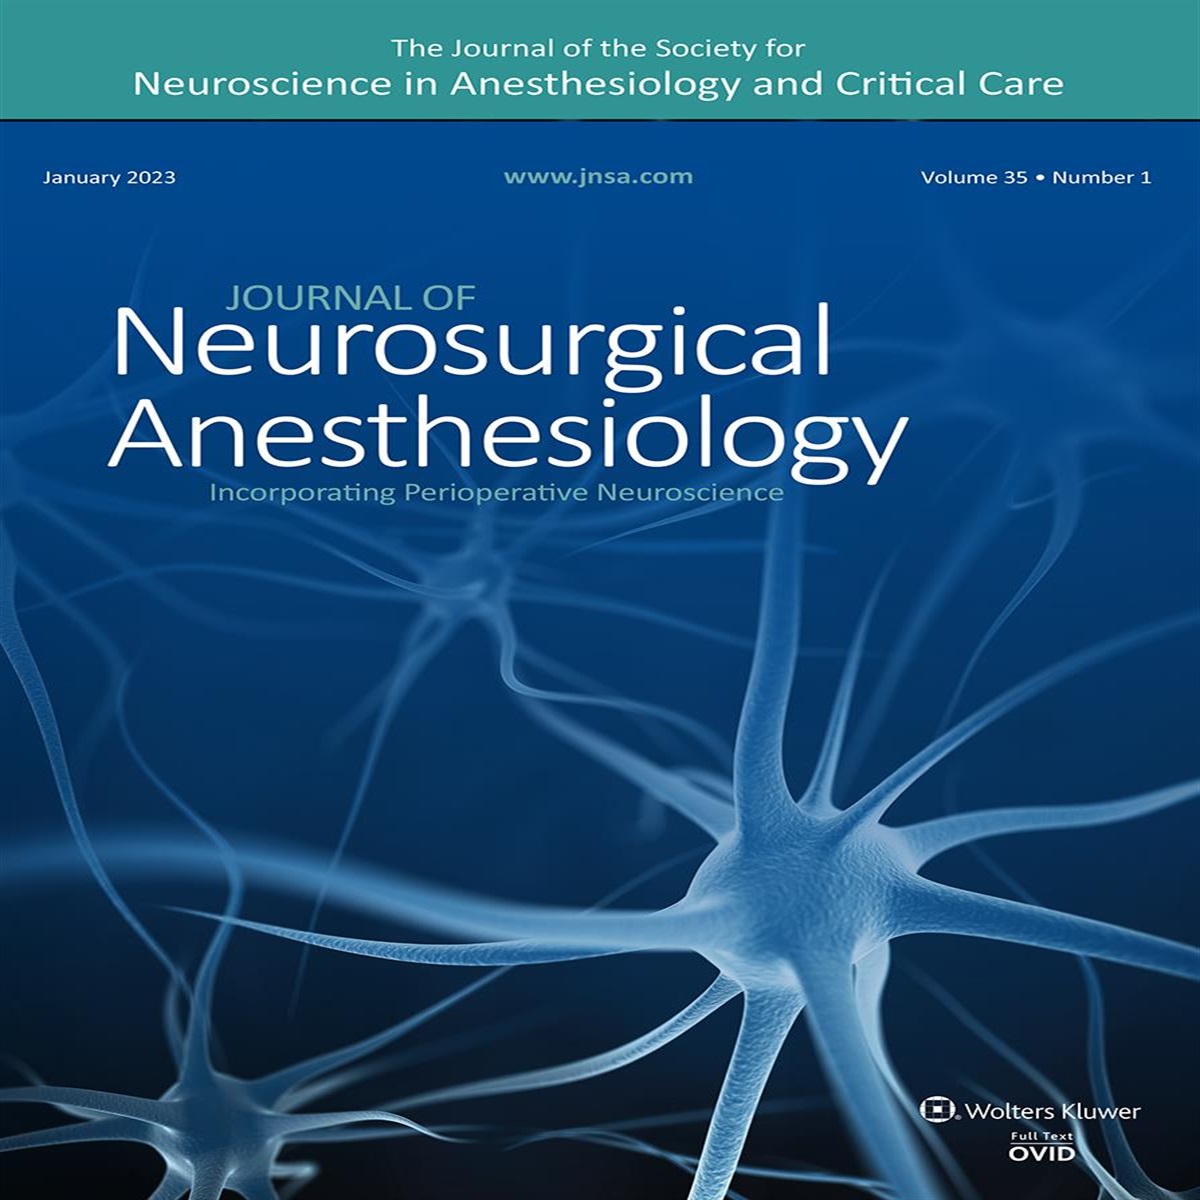 A New Look for the Journal of Neurosurgical Anesthesiology